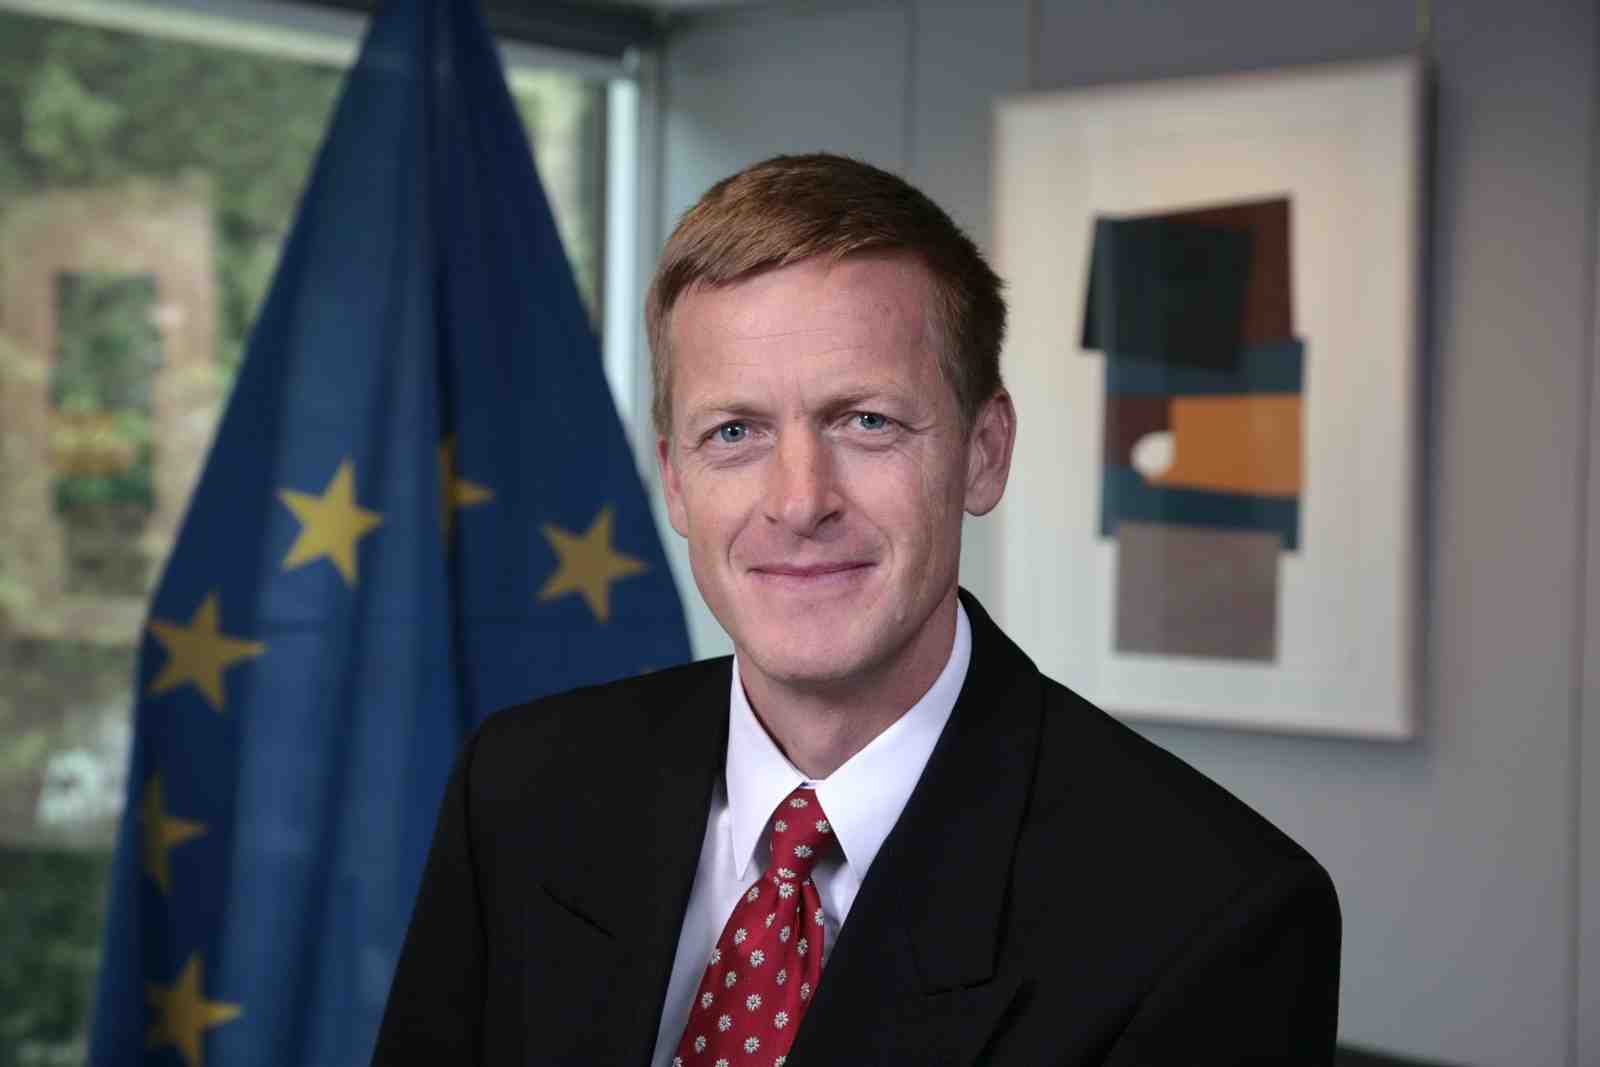 Dr. Zoran Stančič, Deputy Director General of the European Commission Directorate-General for Research